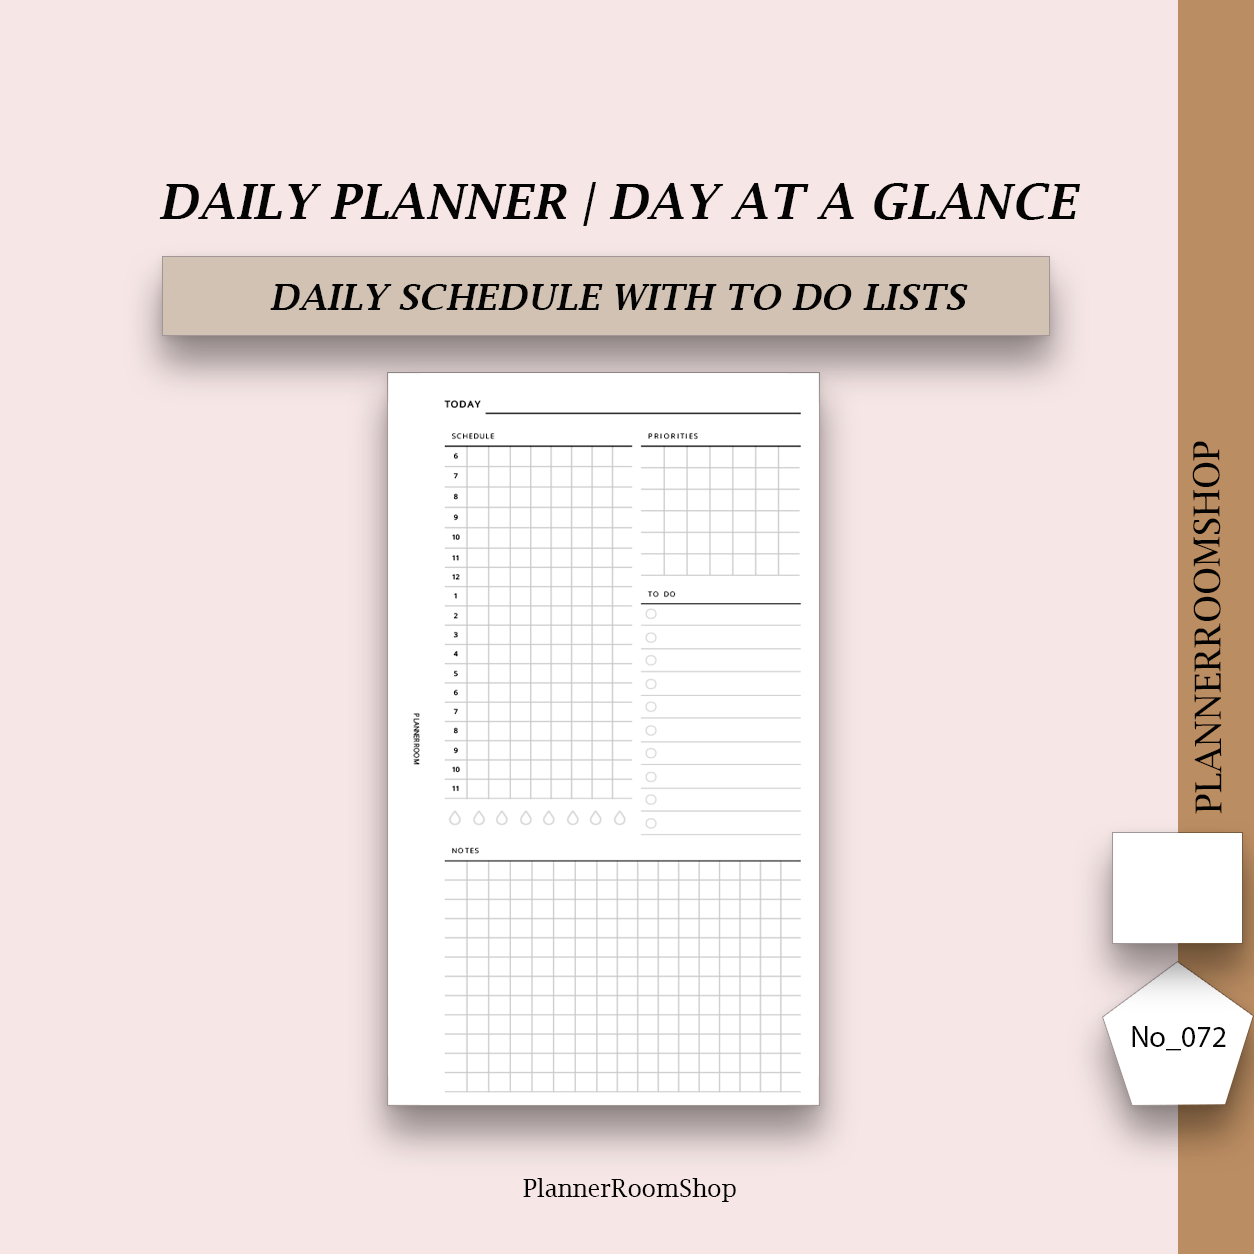 Daily planner | Printable inserts - 072